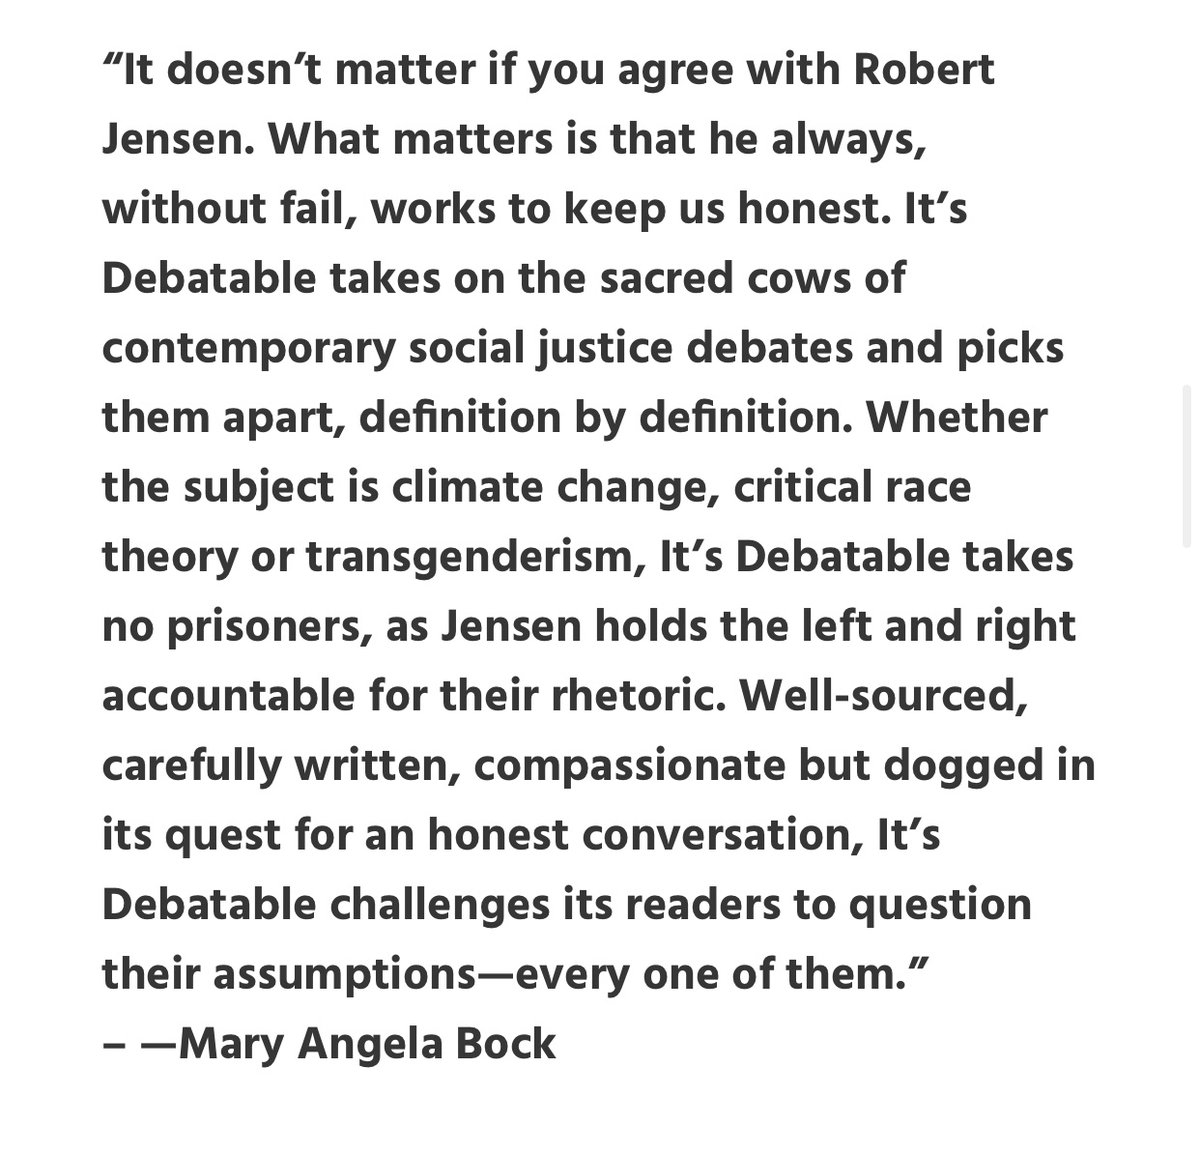 ‘It’s Debatable: Talking Authentically about Tricky Topics’, by @jensenrobertw is out this May. The book will address racism, transgenderism & ecological sustainability in Jensen’s signature clear, honest & humane style. #ItsDebatable #book #trans #racism #sustainability